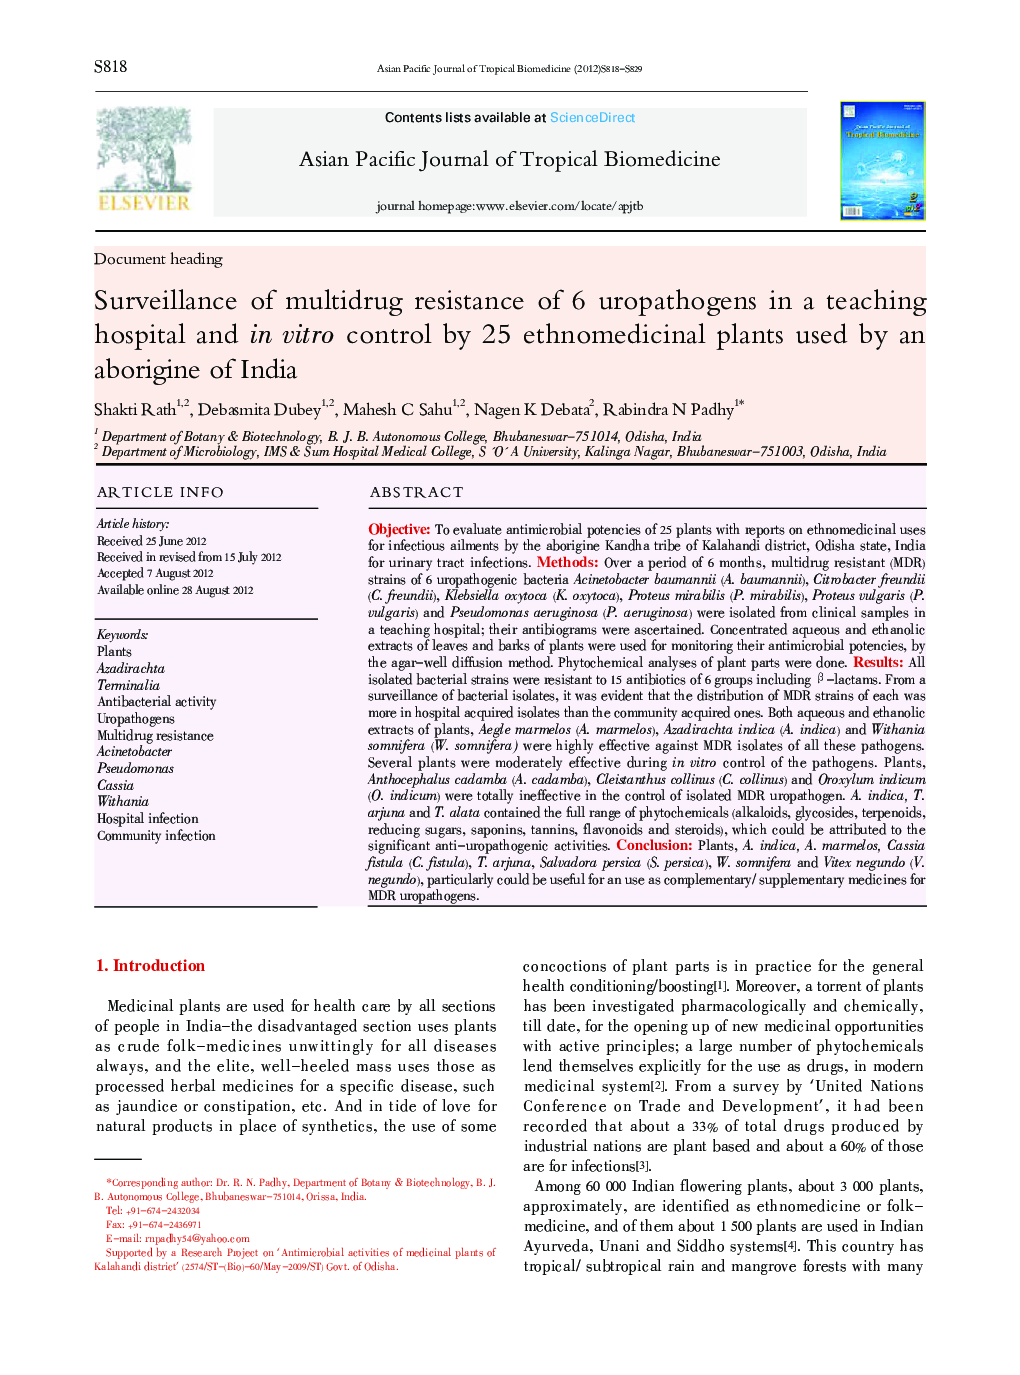 Surveillance of multidrug resistance of 6 uropathogens in a teaching hospital and in vitro control by 25 ethnomedicinal plants used by an aborigine of India